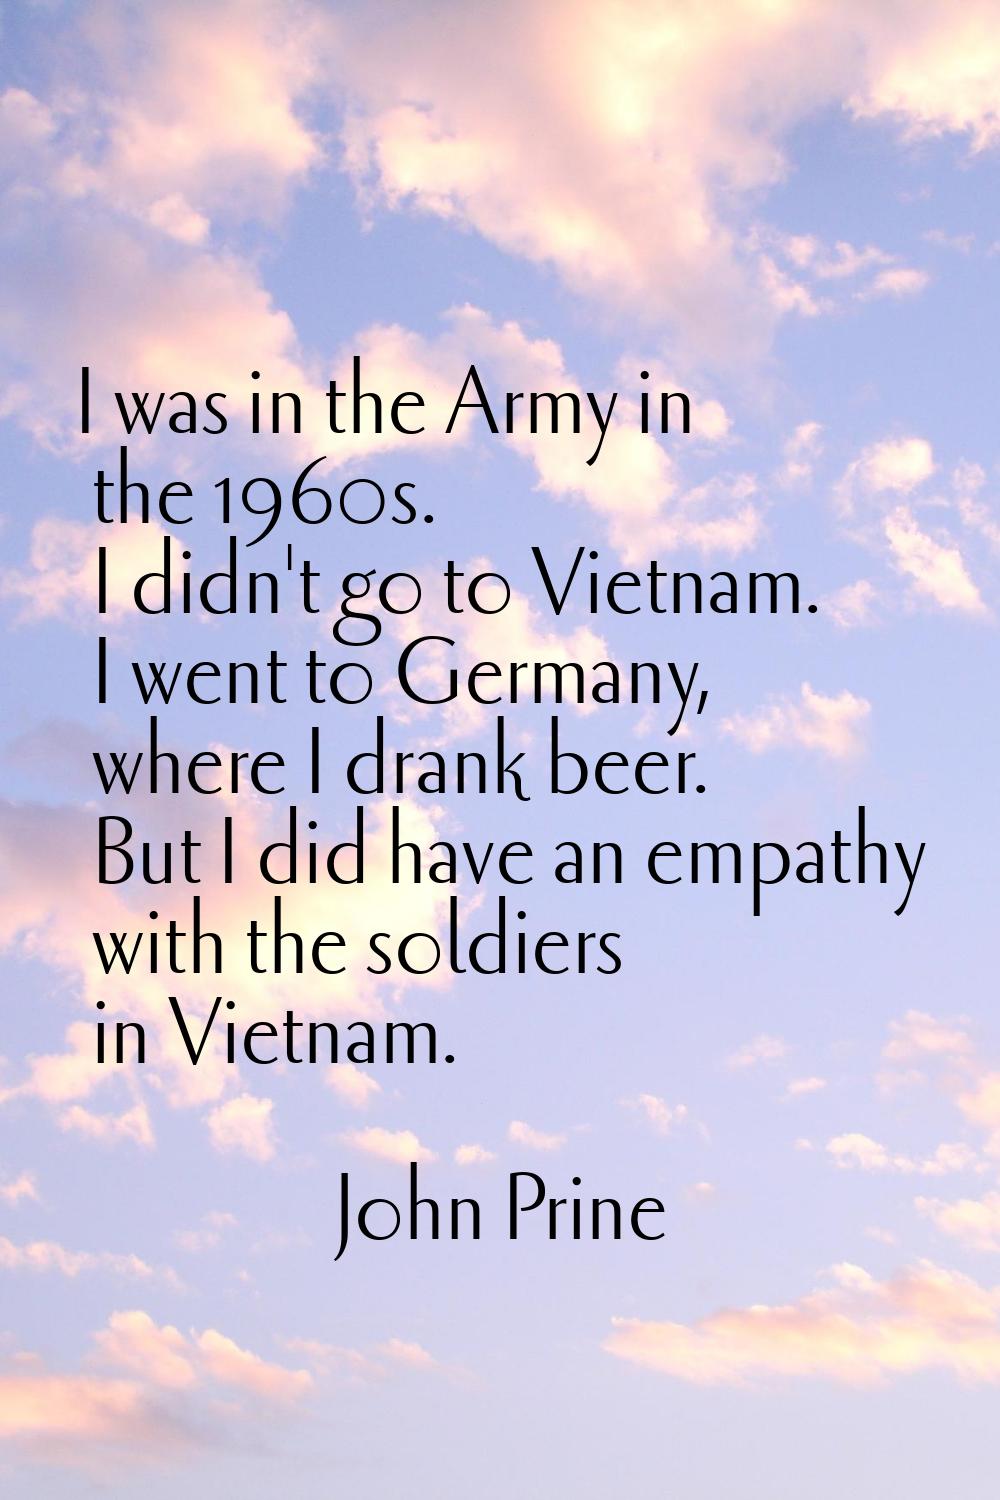 I was in the Army in the 1960s. I didn't go to Vietnam. I went to Germany, where I drank beer. But 